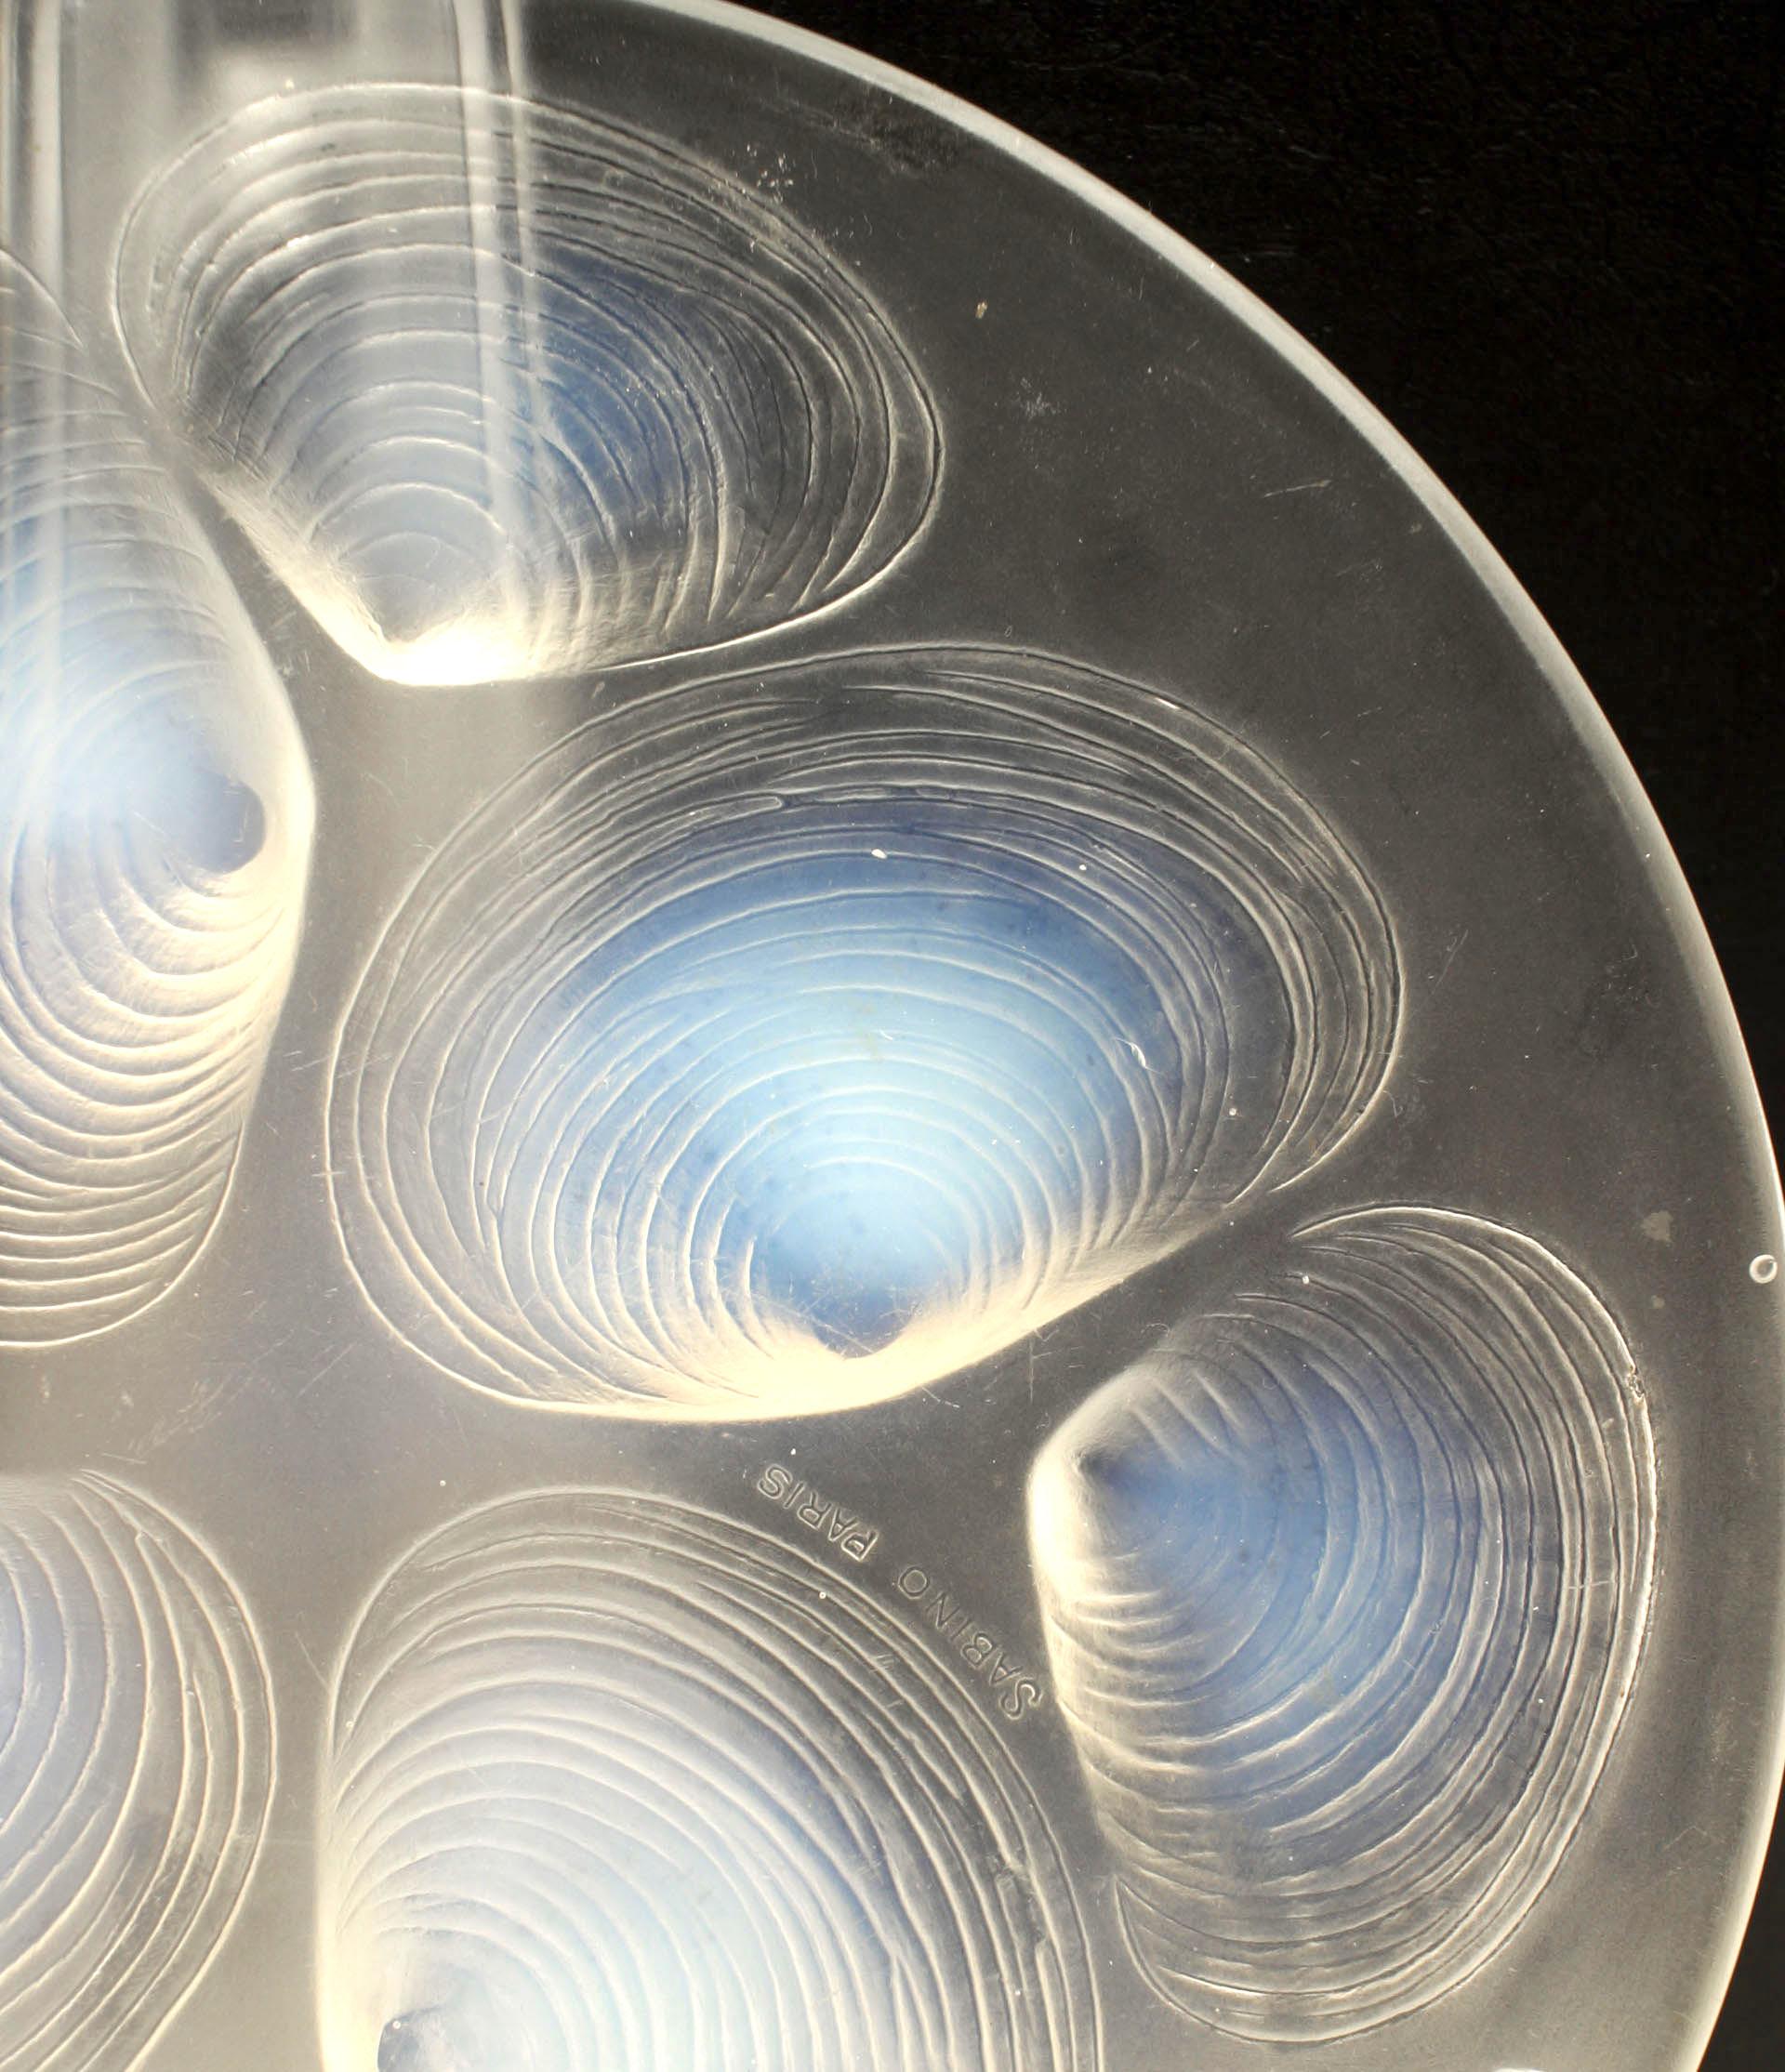 Mid-20th Century French Art Deco Opalescent Clam Shell Plate For Sale